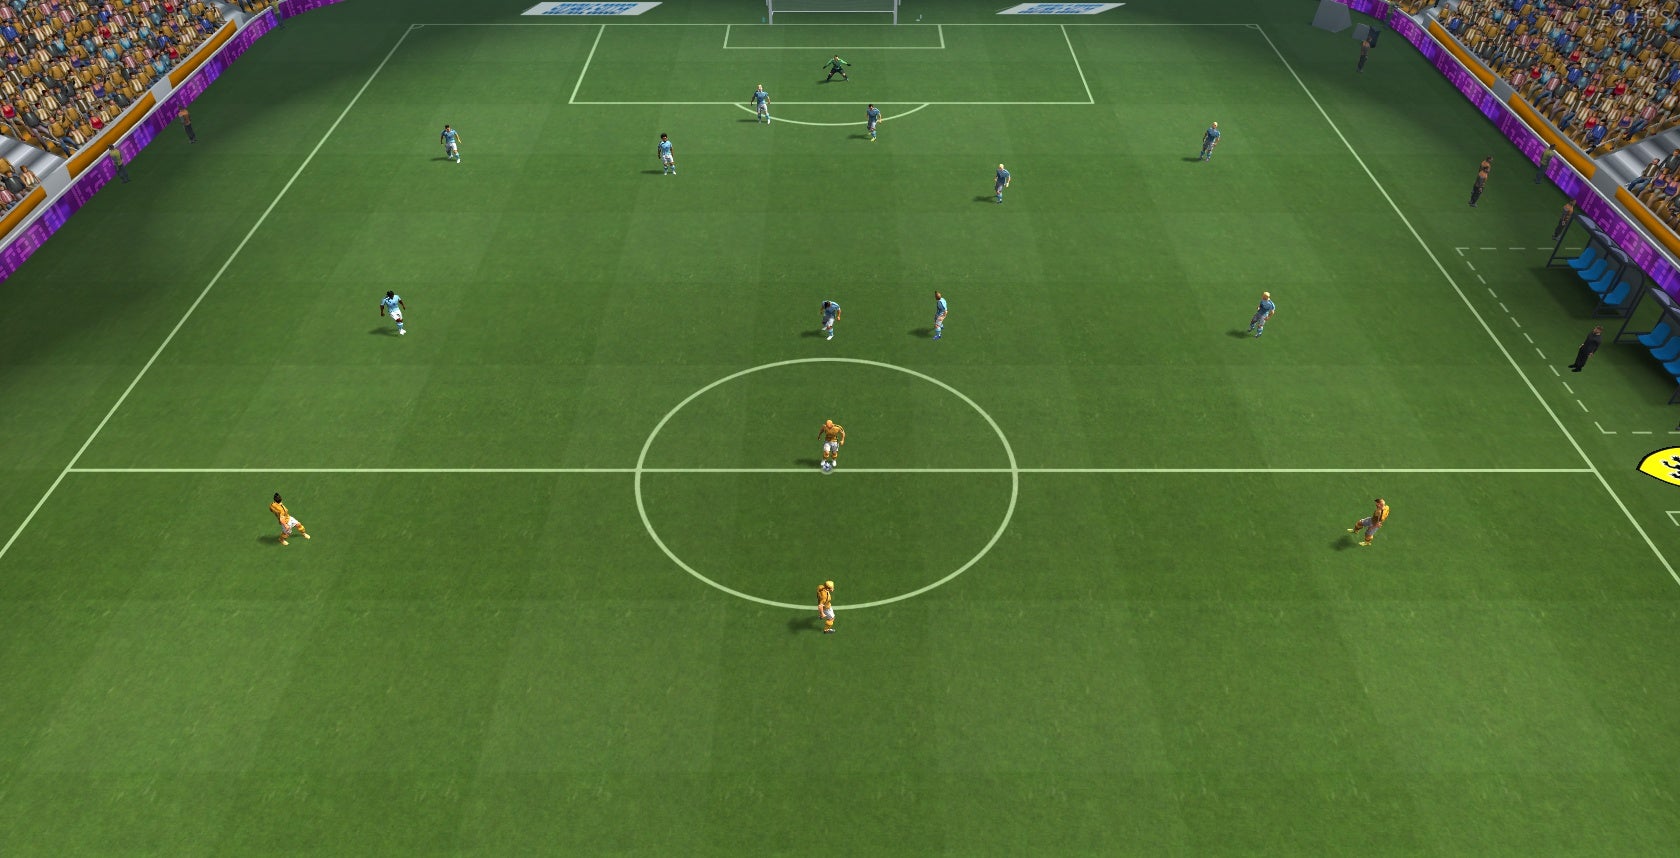 A screenshot of Sociable Soccer, showing a football pitch from above with players standing around.